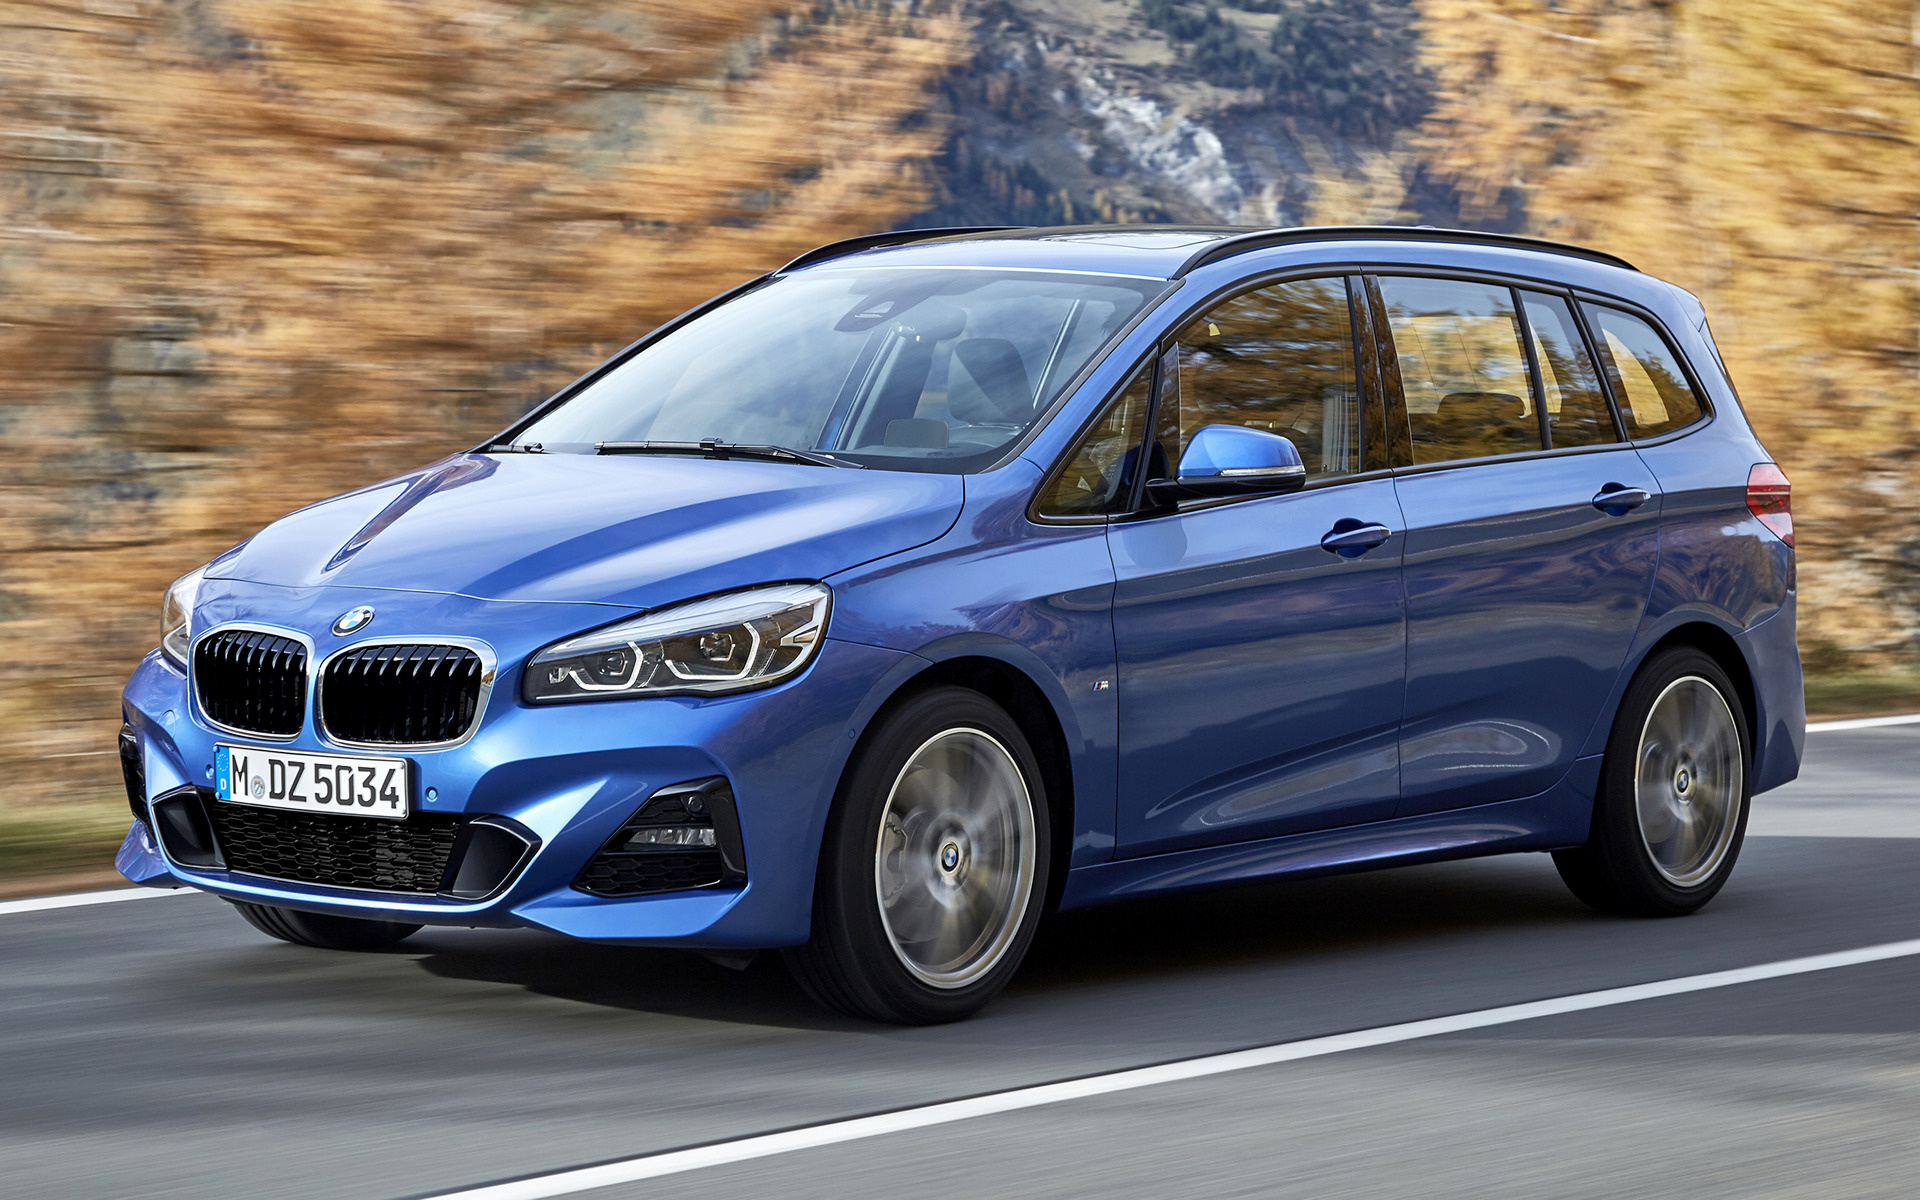 2018 BMW 2 Series Gran Tourer M Sport Wallpapers and HD